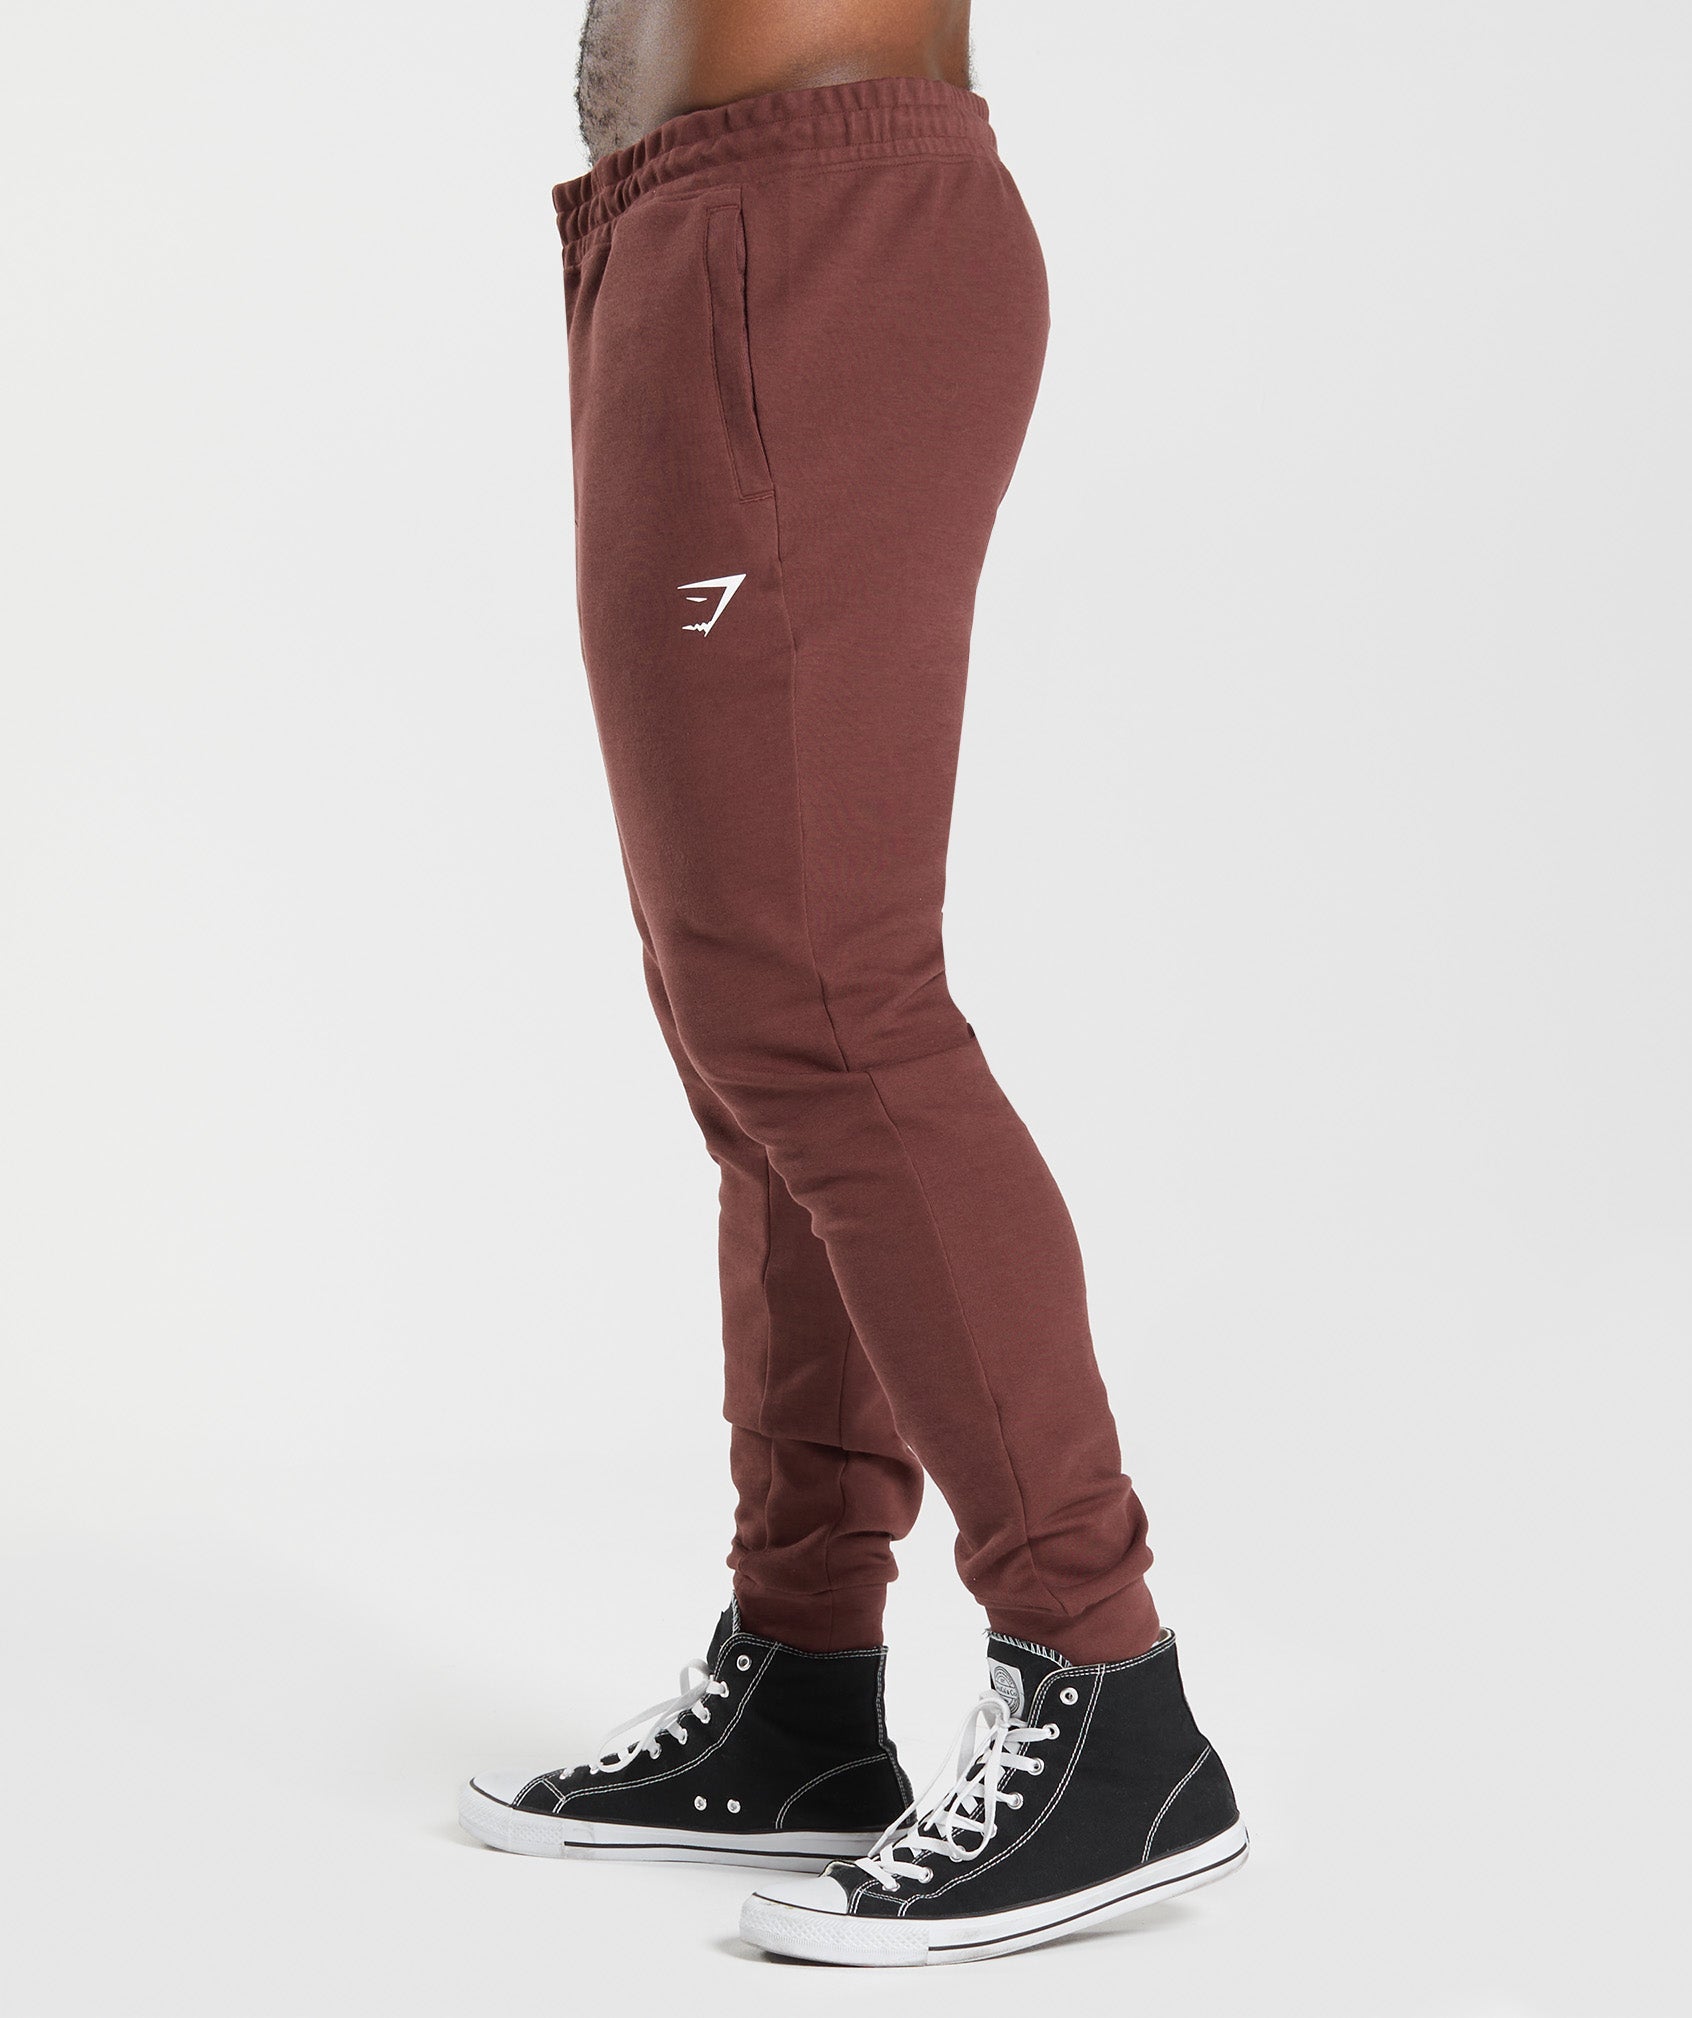 React Joggers in Cherry Brown - view 3